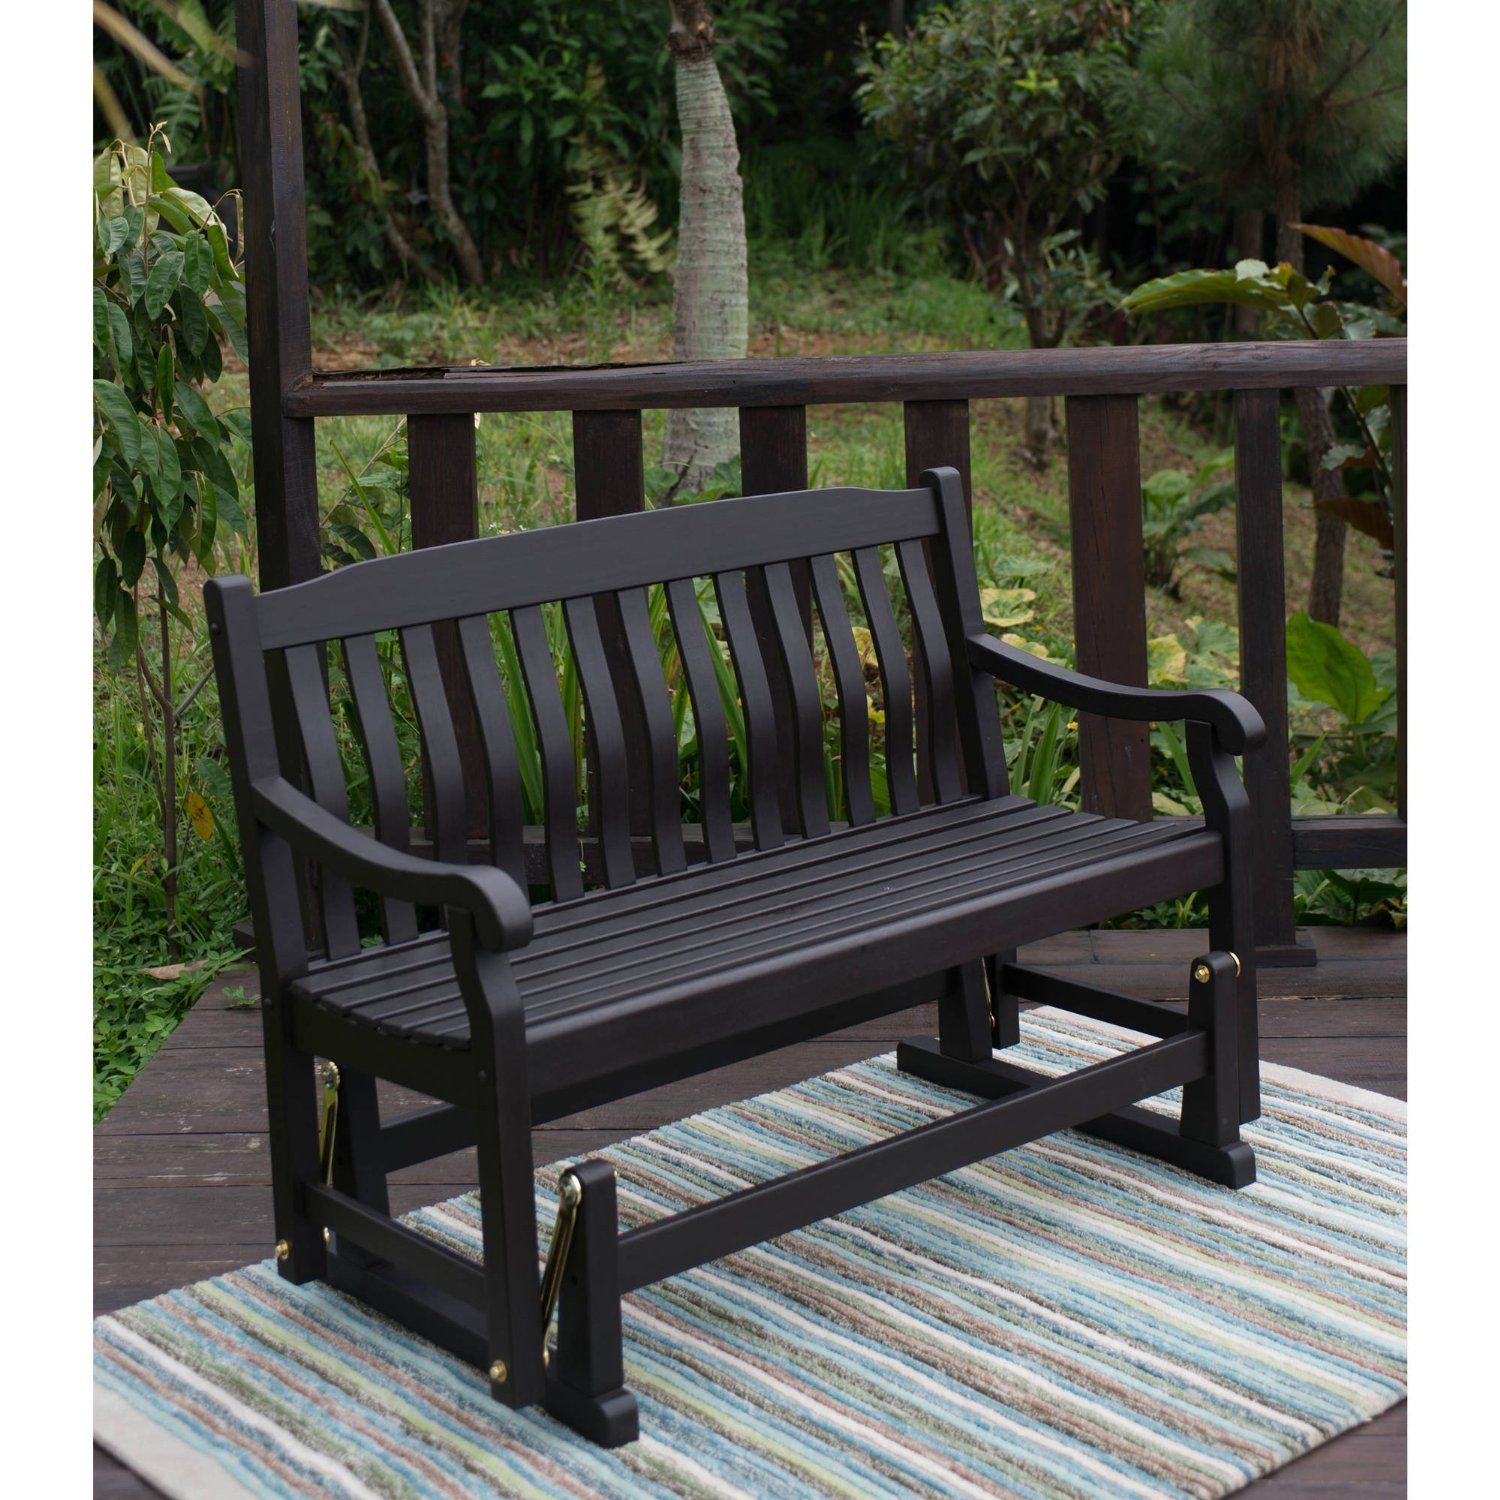 Cheap Glider Patio Bench, Find Glider Patio Bench Deals On Intended For Teak Glider Benches (View 25 of 25)